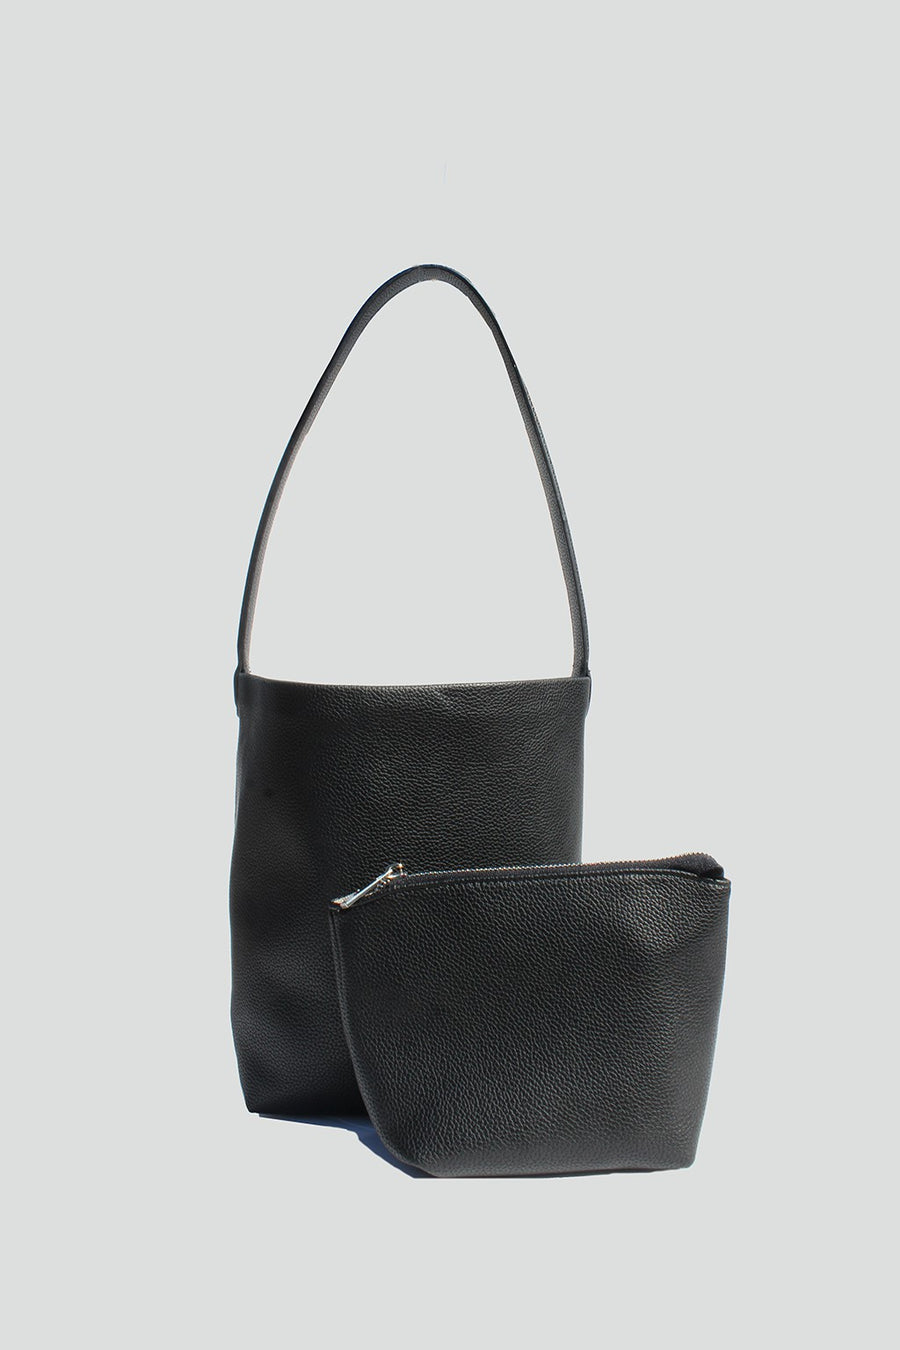 Featuring a classic tote style bag with magnetic closure and includes a mini pouch in the color black 